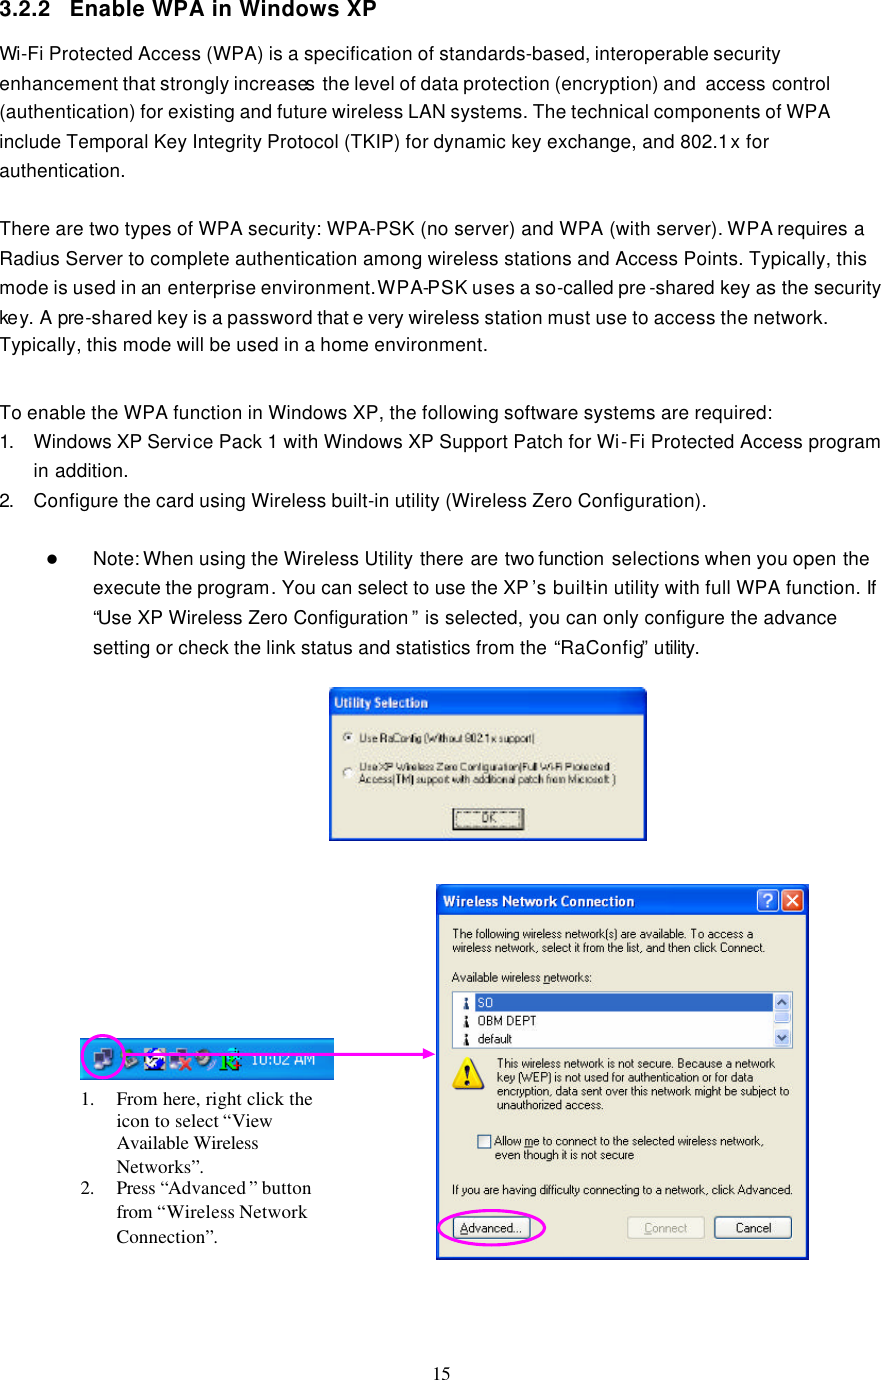  15  3.2.2 Enable WPA in Windows XP Wi-Fi Protected Access (WPA) is a specification of standards-based, interoperable security enhancement that strongly increases the level of data protection (encryption) and  access control (authentication) for existing and future wireless LAN systems. The technical components of WPA include Temporal Key Integrity Protocol (TKIP) for dynamic key exchange, and 802.1x for authentication.  There are two types of WPA security: WPA-PSK (no server) and WPA (with server). WPA requires a Radius Server to complete authentication among wireless stations and Access Points. Typically, this mode is used in an enterprise environment. WPA-PSK uses a so-called pre -shared key as the security ke y. A pre-shared key is a password that e very wireless station must use to access the network. Typically, this mode will be used in a home environment.    To enable the WPA function in Windows XP, the following software systems are required: 1. Windows XP Service Pack 1 with Windows XP Support Patch for Wi-Fi Protected Access program in addition. 2. Configure the card using Wireless built-in utility (Wireless Zero Configuration).  l Note: When using the Wireless Utility there are two function  selections when you open the execute the program. You can select to use the XP ’s built-in utility with full WPA function. If “Use XP Wireless Zero Configuration ” is selected, you can only configure the advance setting or check the link status and statistics from the “RaConfig” utility.                       1. From here, right click the icon to select “View Available Wireless Networks”. 2. Press “Advanced ” button from “Wireless Network Connection”. 